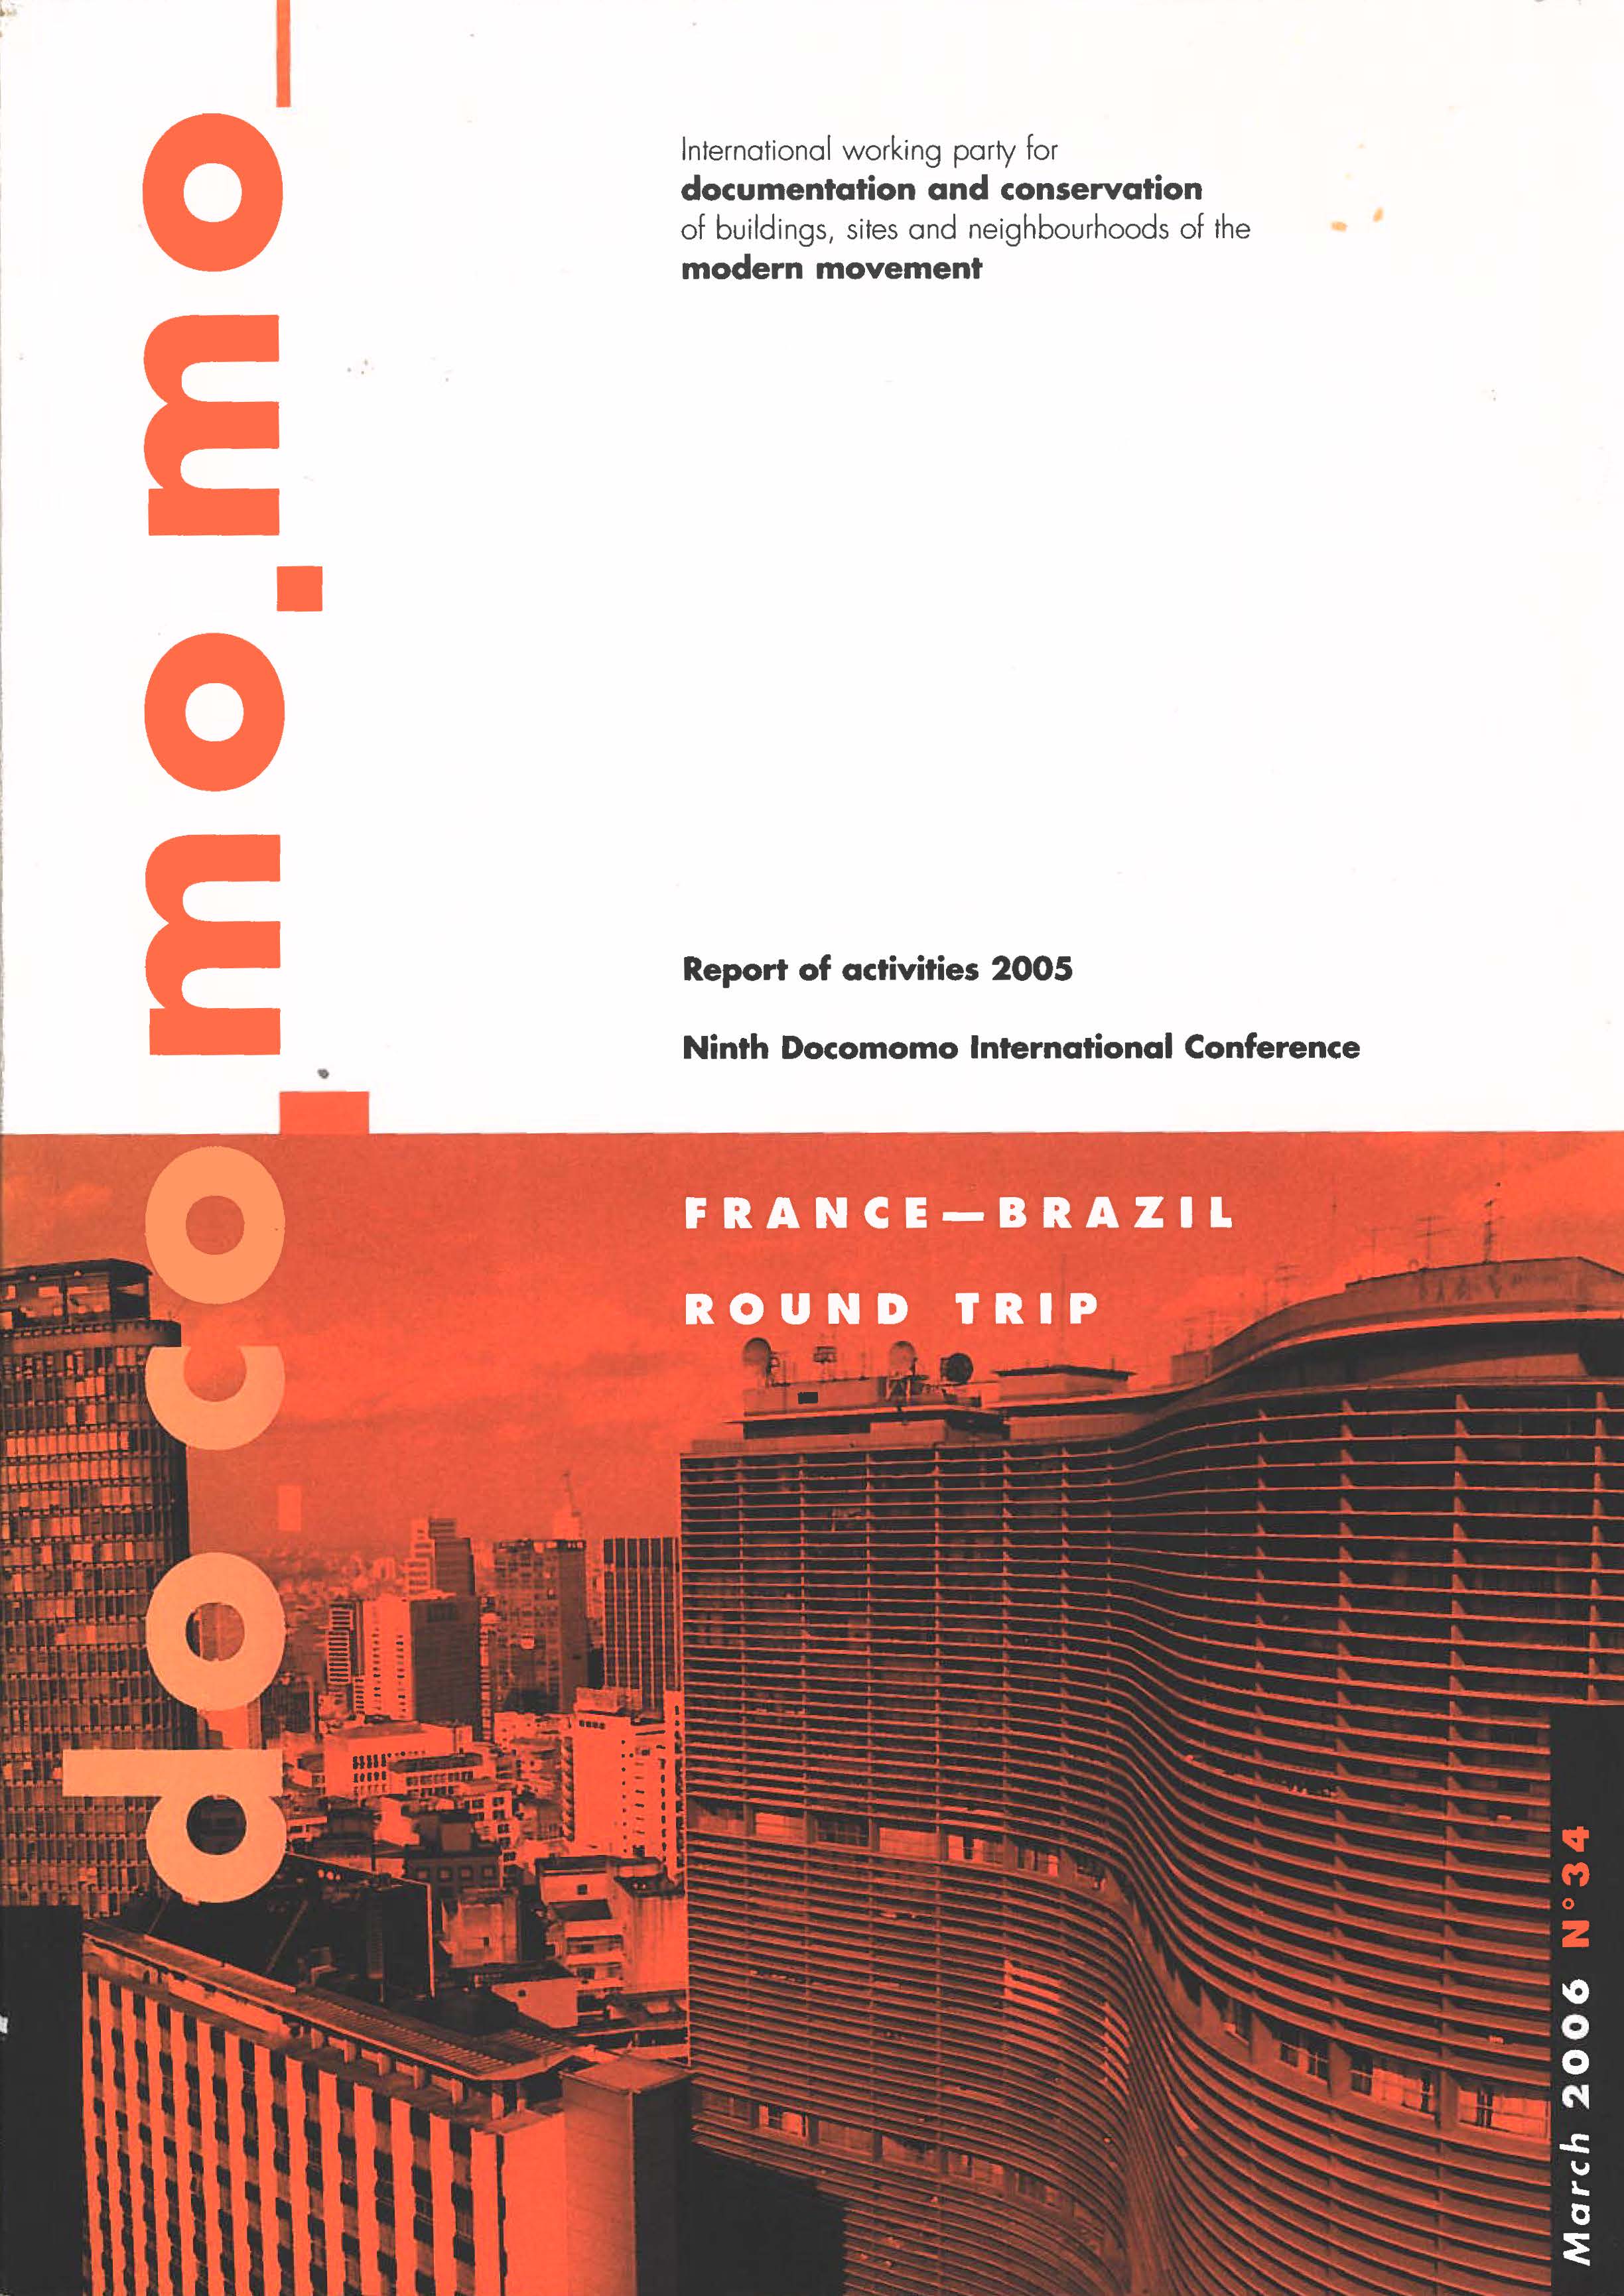 						View No. 34 (2006): France-Brazil Round Trip. Report of Activities - Ninth Docomomo International Conference
					